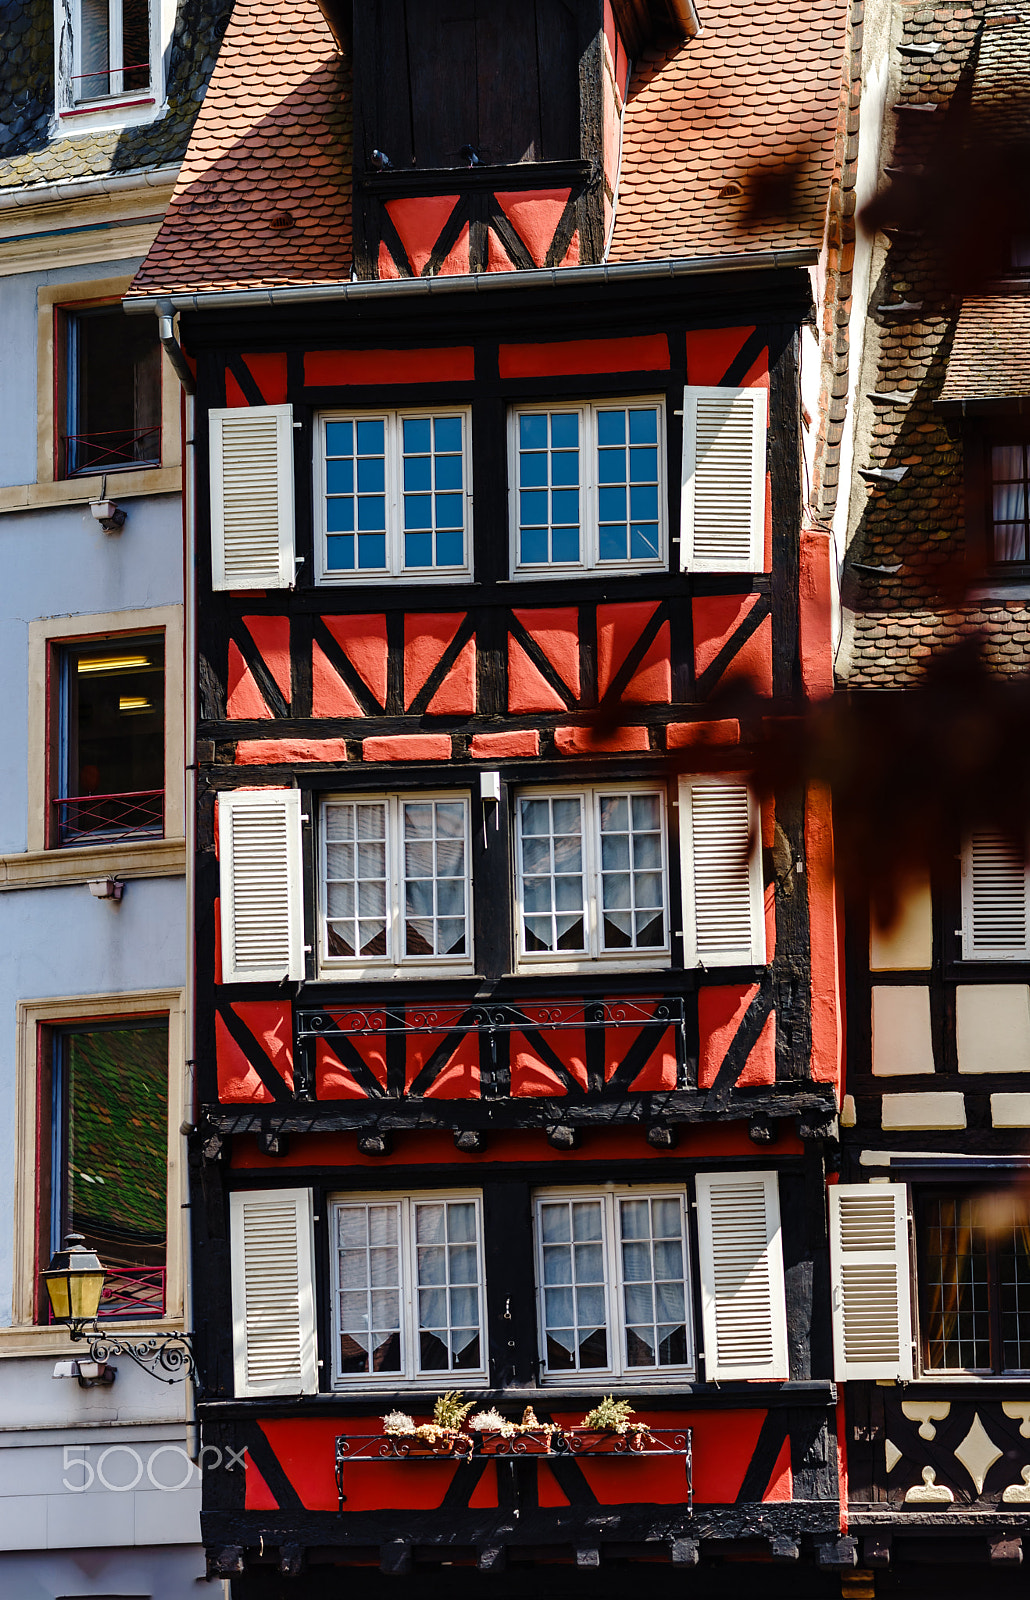 Sony a99 II sample photo. Old beautiful windows in historical center of colmar, alsacien s photography